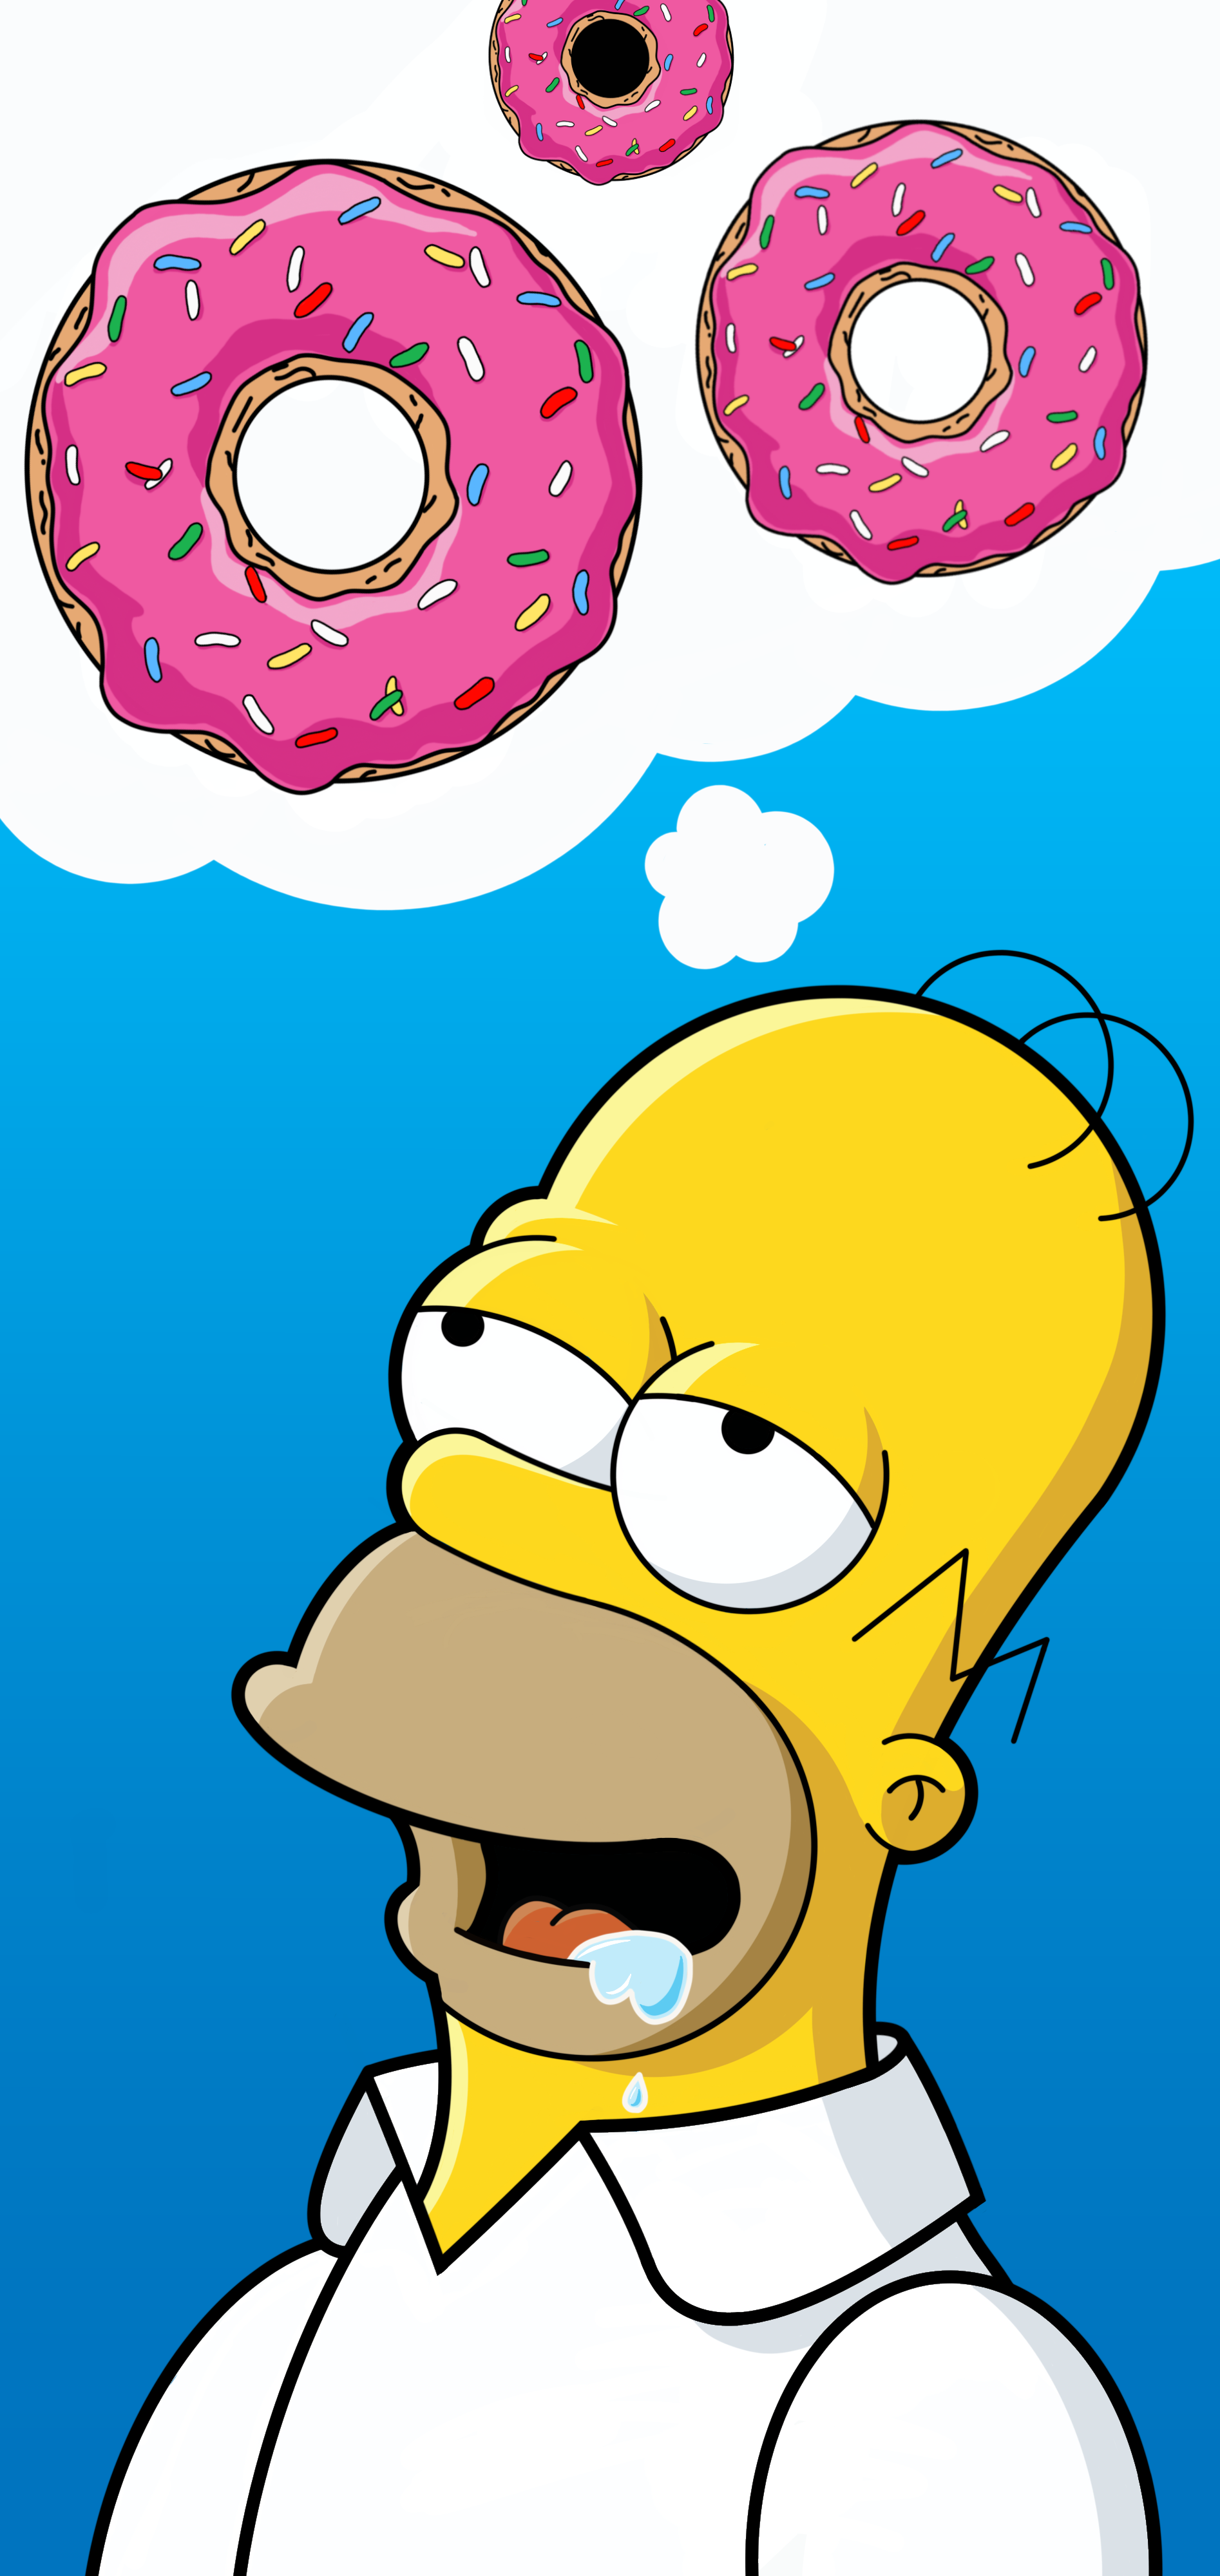 NoteHomer Simpsons Donut